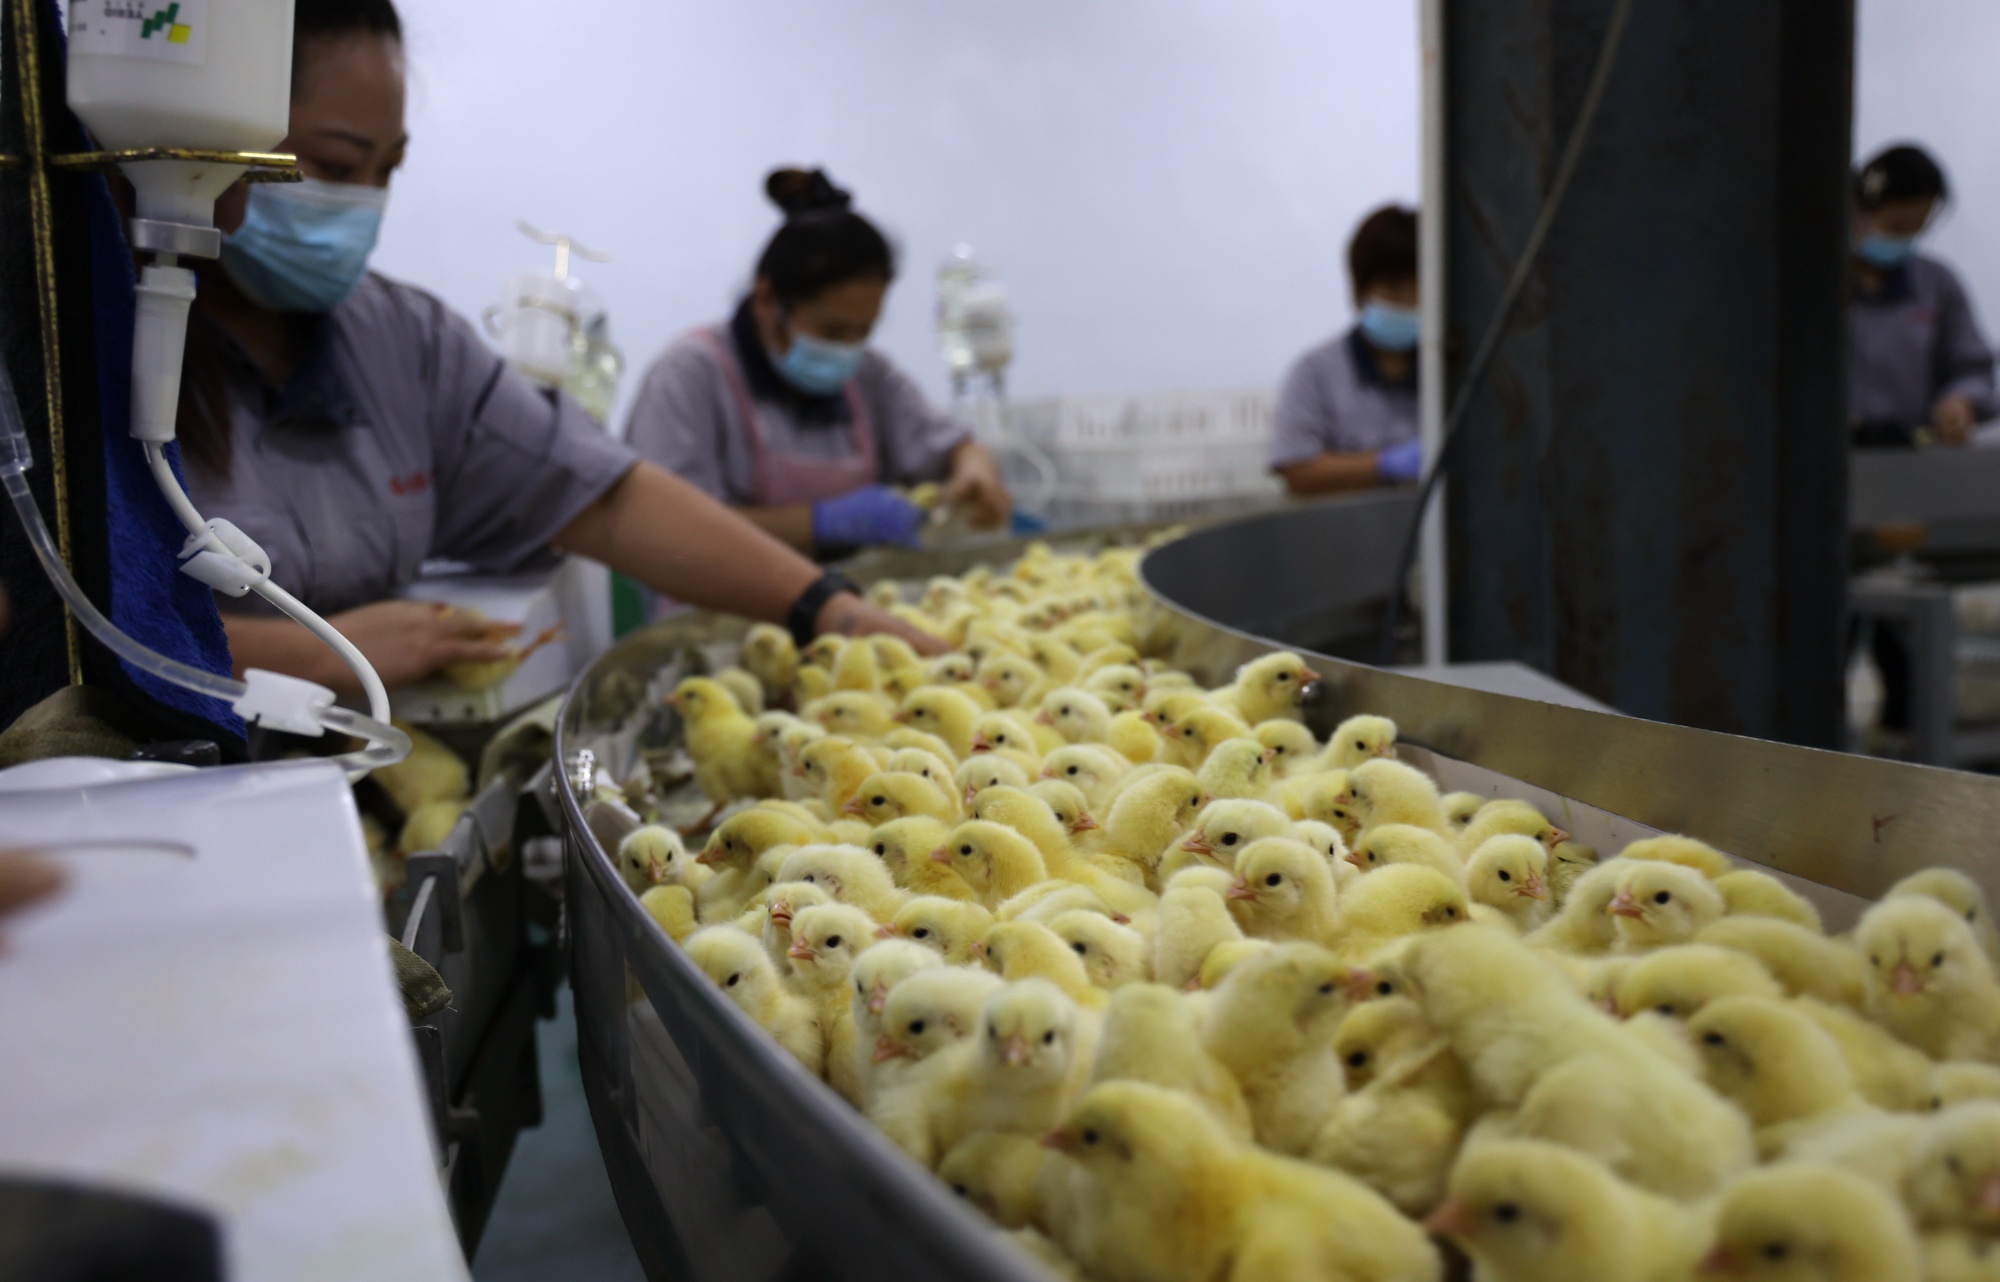 Workers inoculate the newborn chickens with avian flu vaccines at a chicken hatchery in Shandong province.